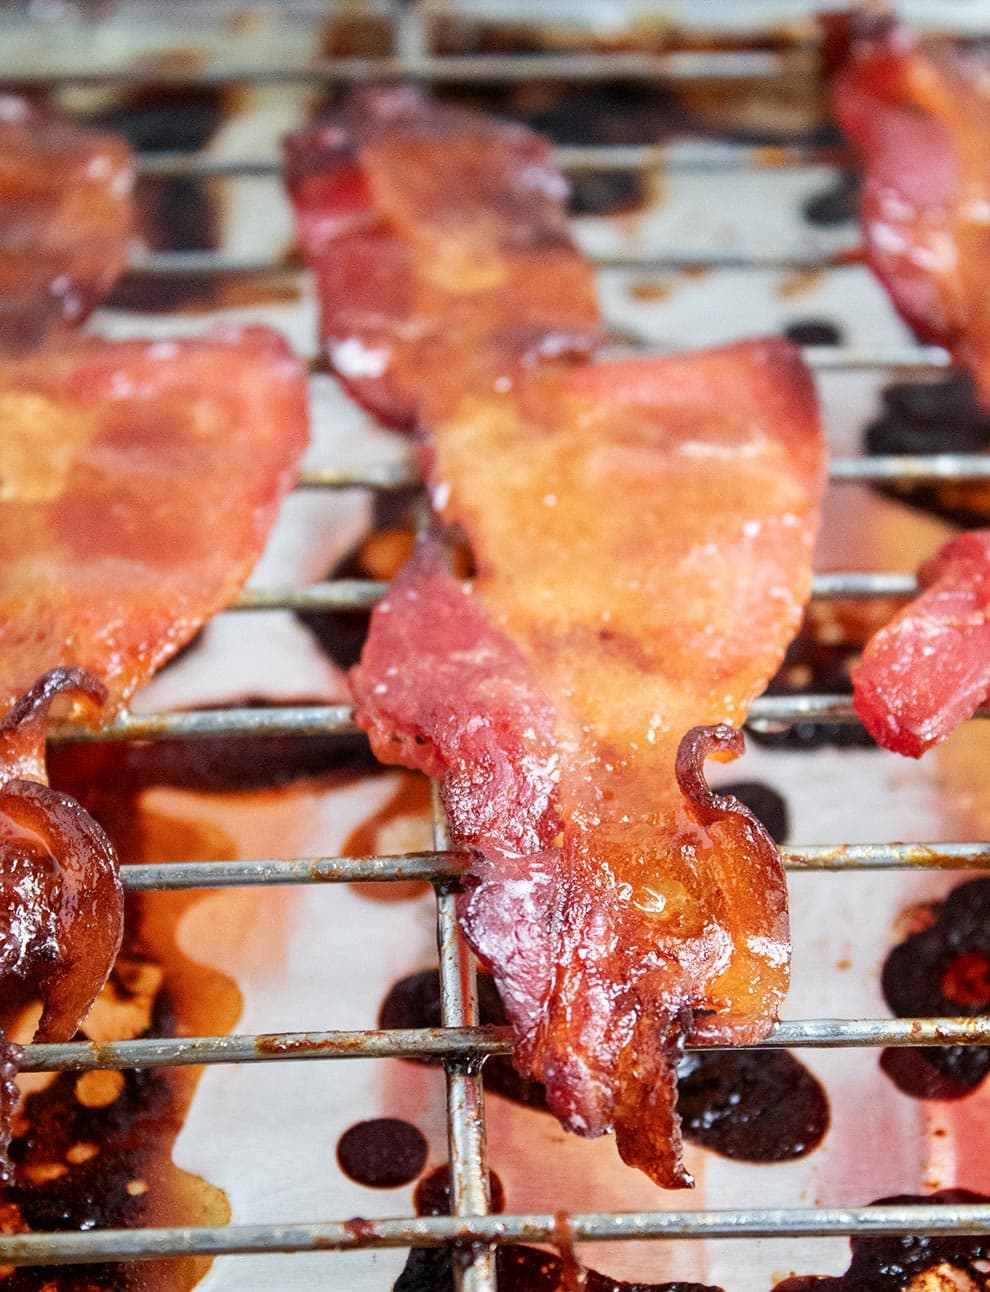 keto candied bacon up close on a rack fully cooked